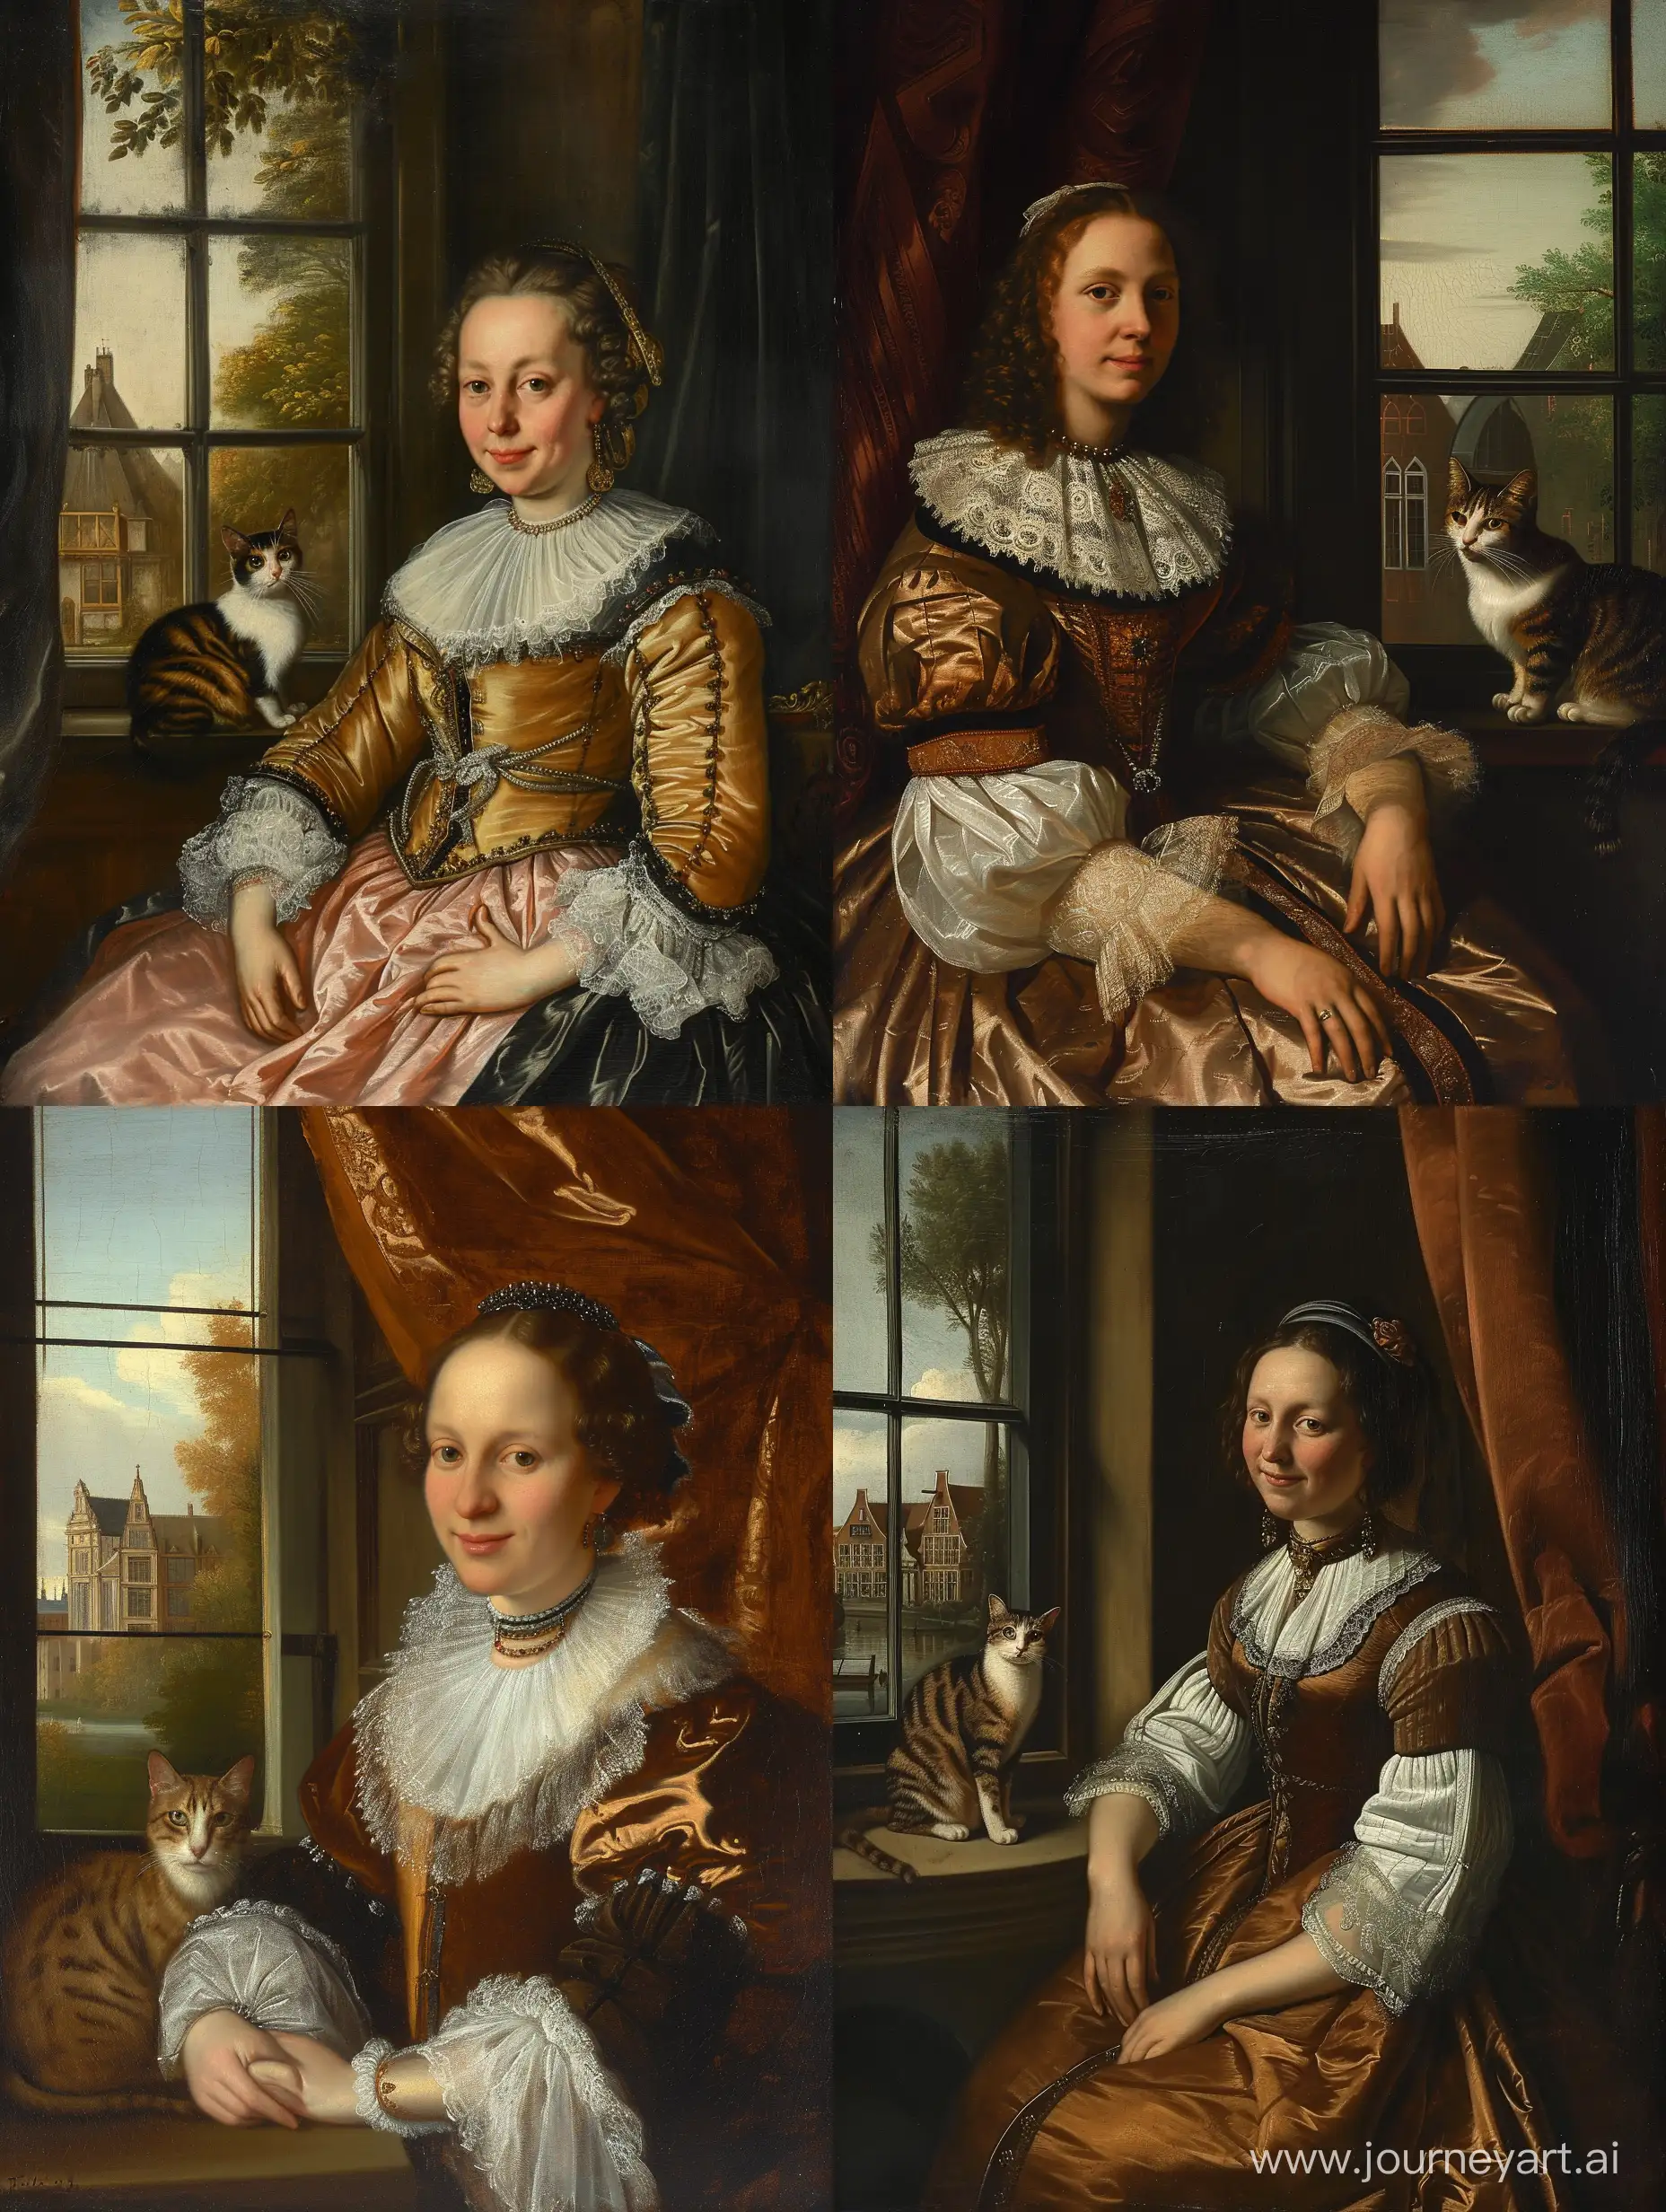 1650s-Fashion-Portrait-Elegant-Lady-by-the-Window-with-a-Cat